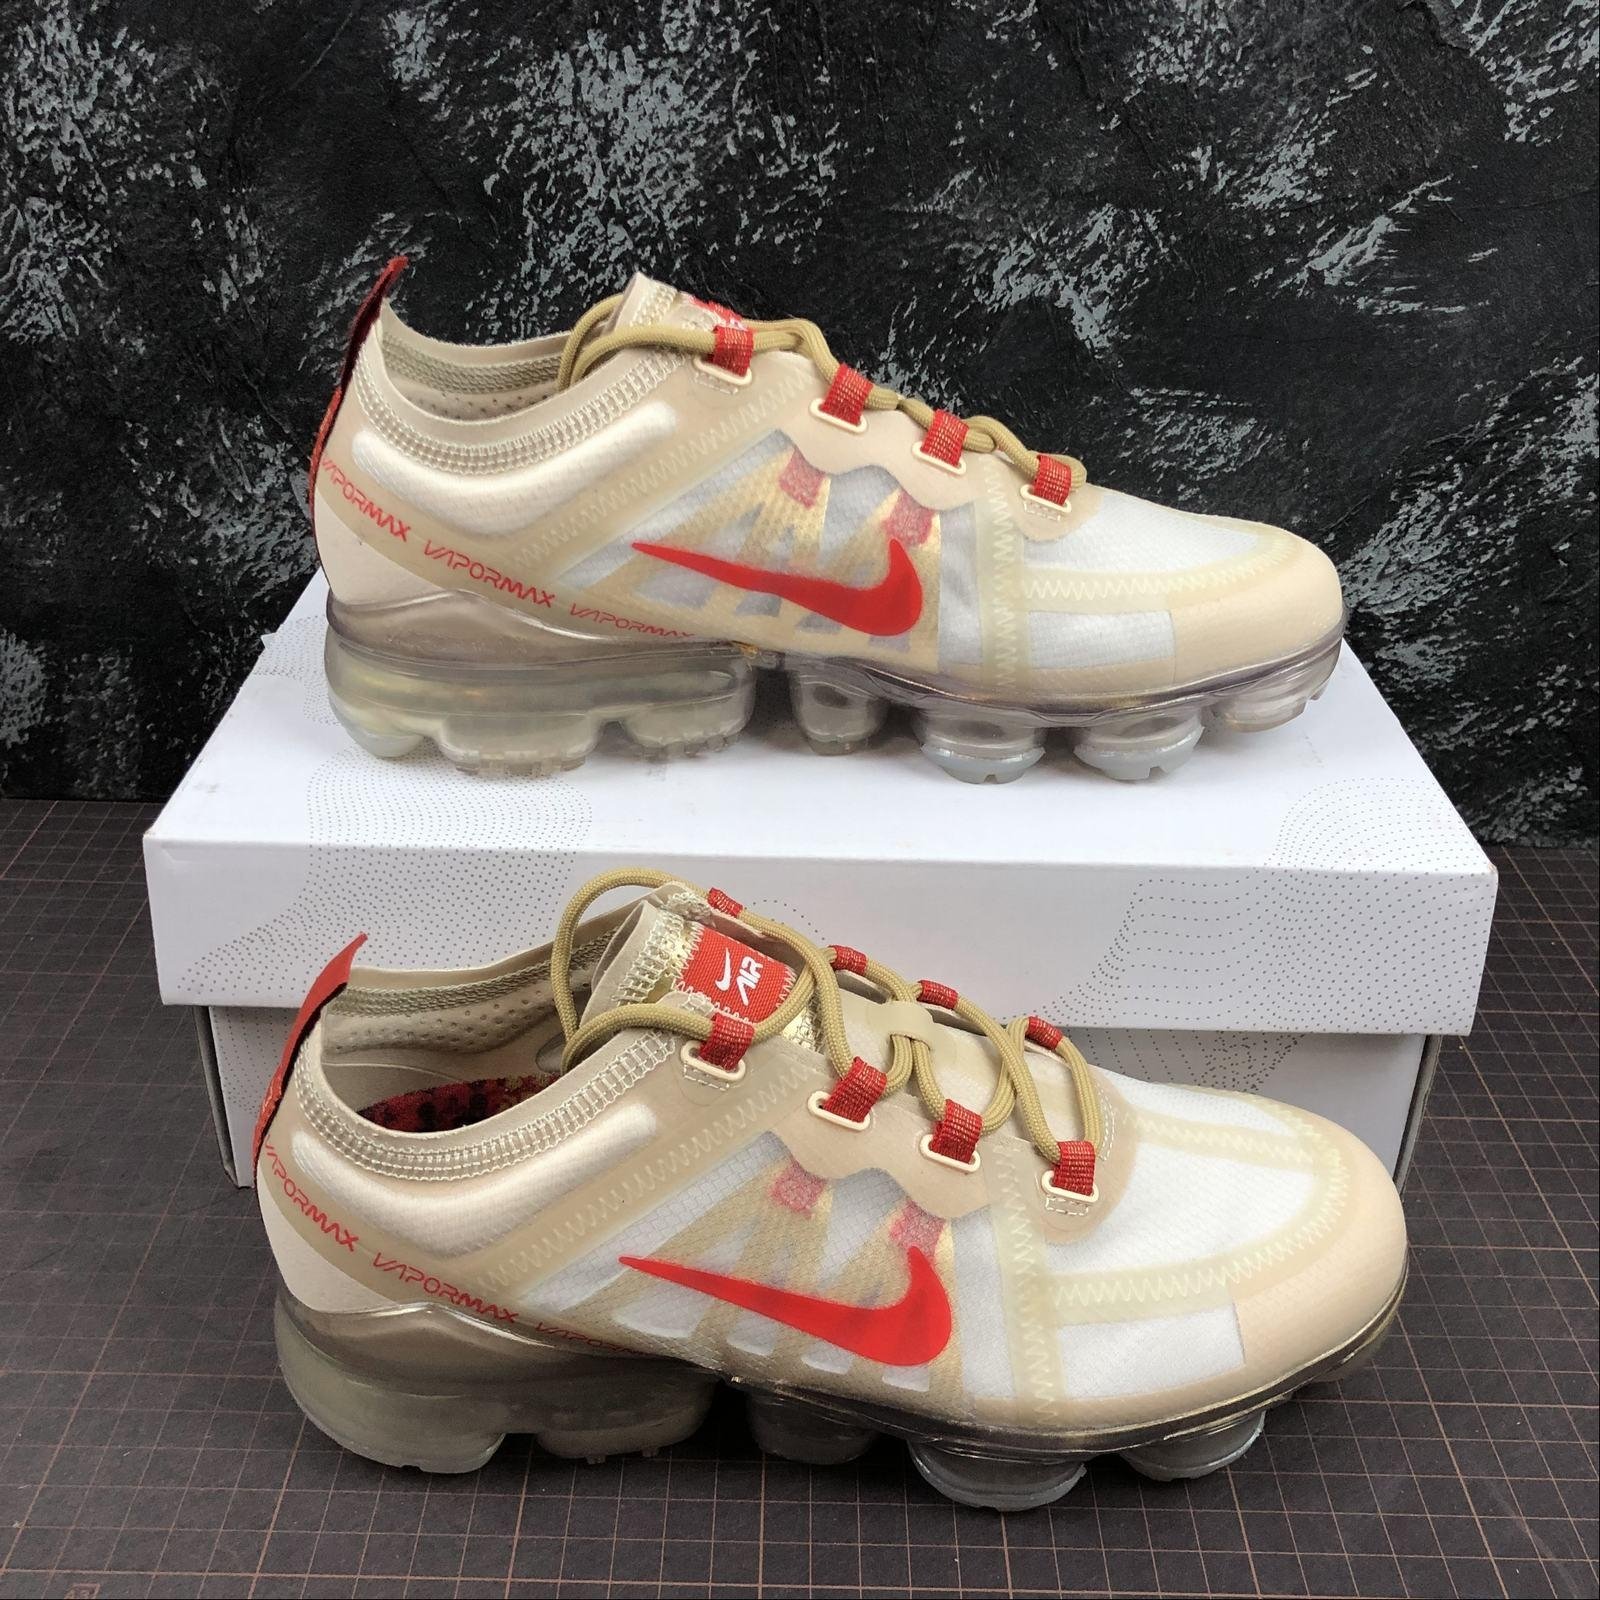 More styles are showed here: :http://2942273488.x.yupoo.com/search/album?uid=1&q=2019+NIKE+AIR+VAPORMAX